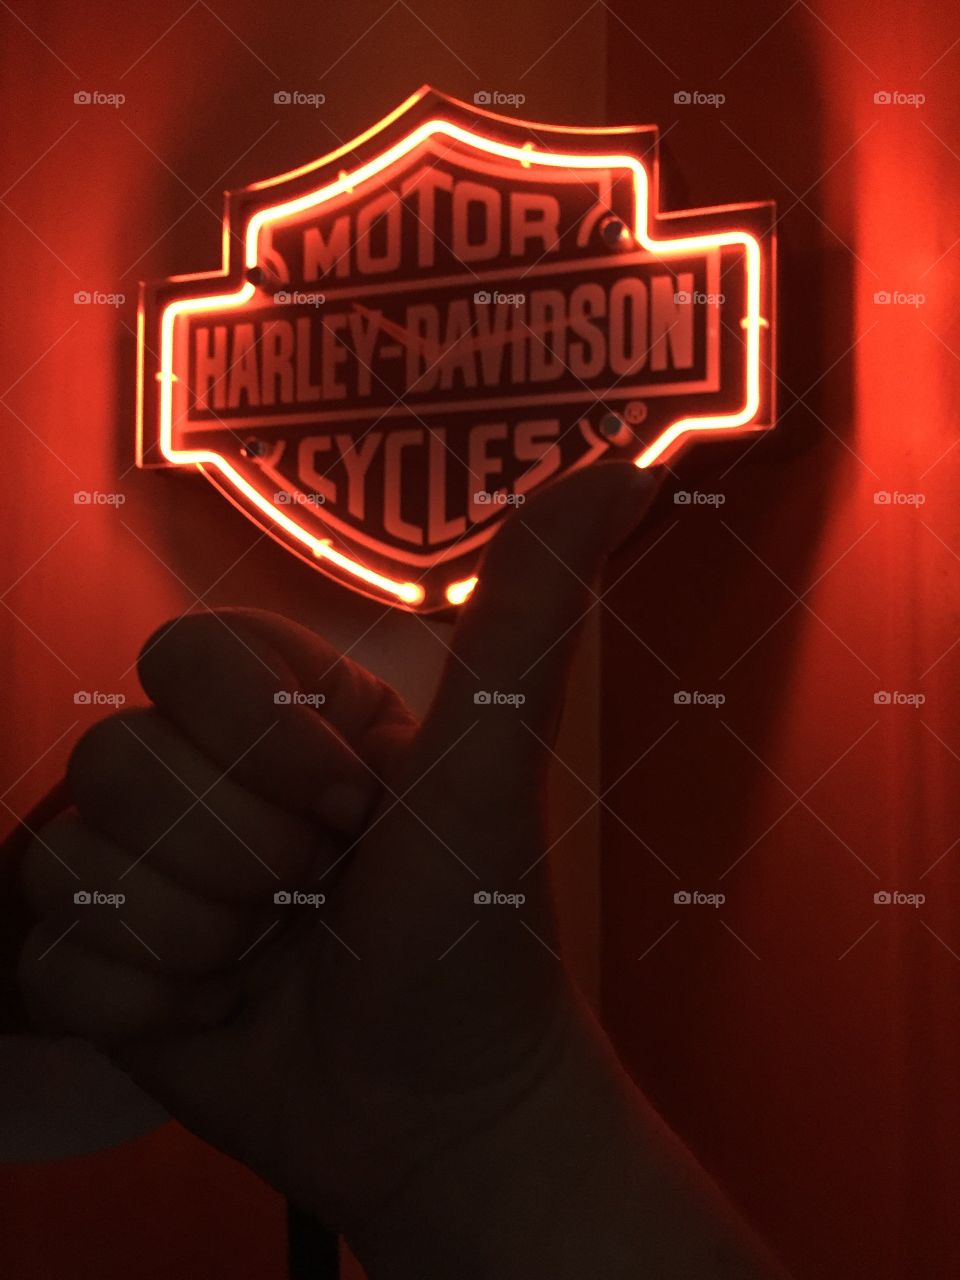 Lights lead to action! Harley themed too with bright lights 